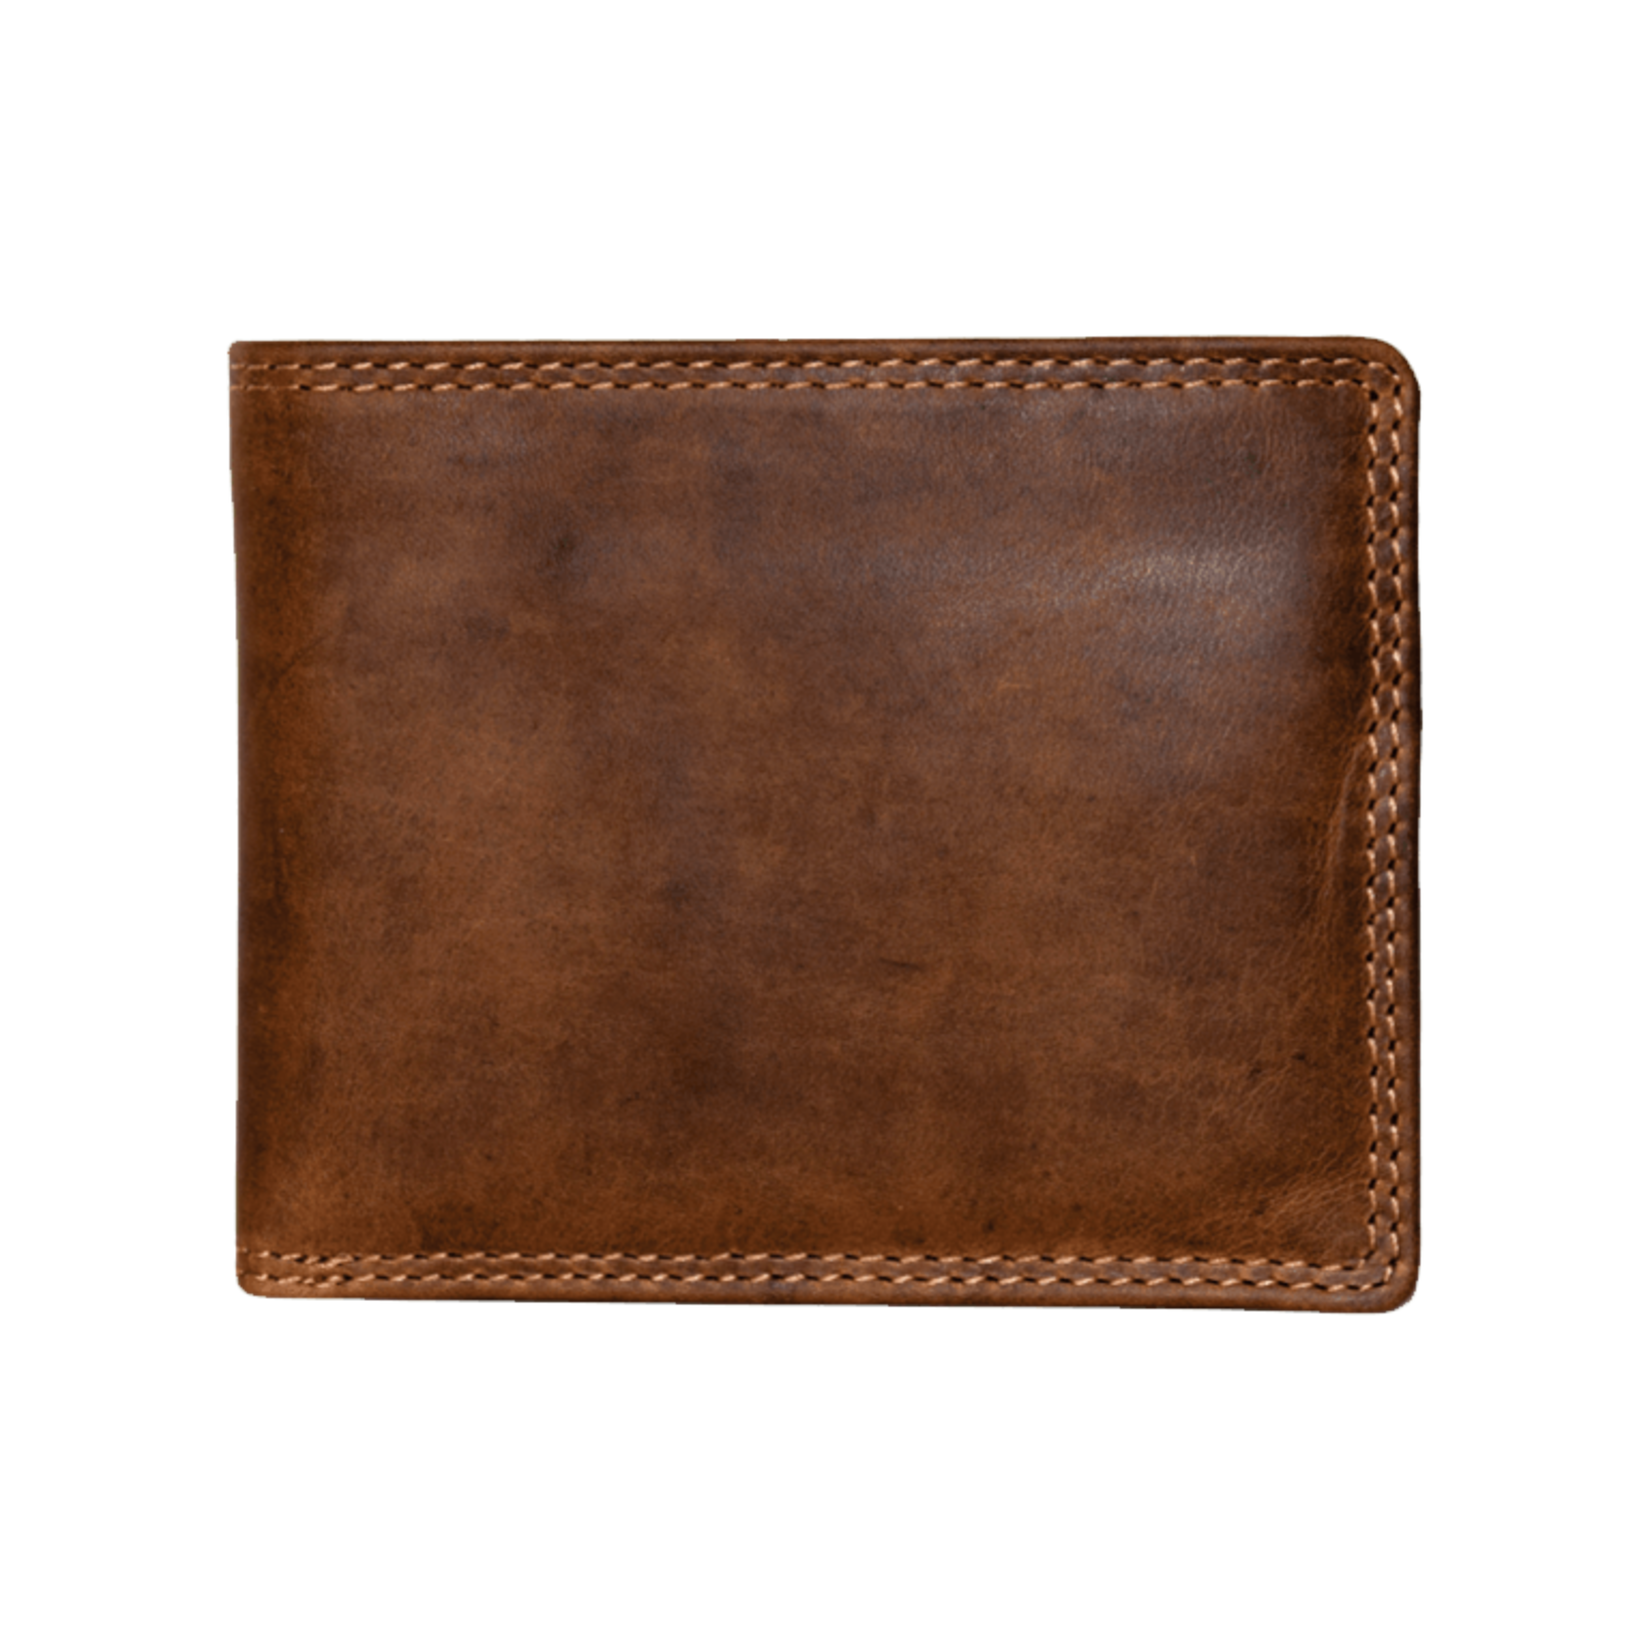 Rugged Earth Leather Billfold Wallet with Centre Card Holder